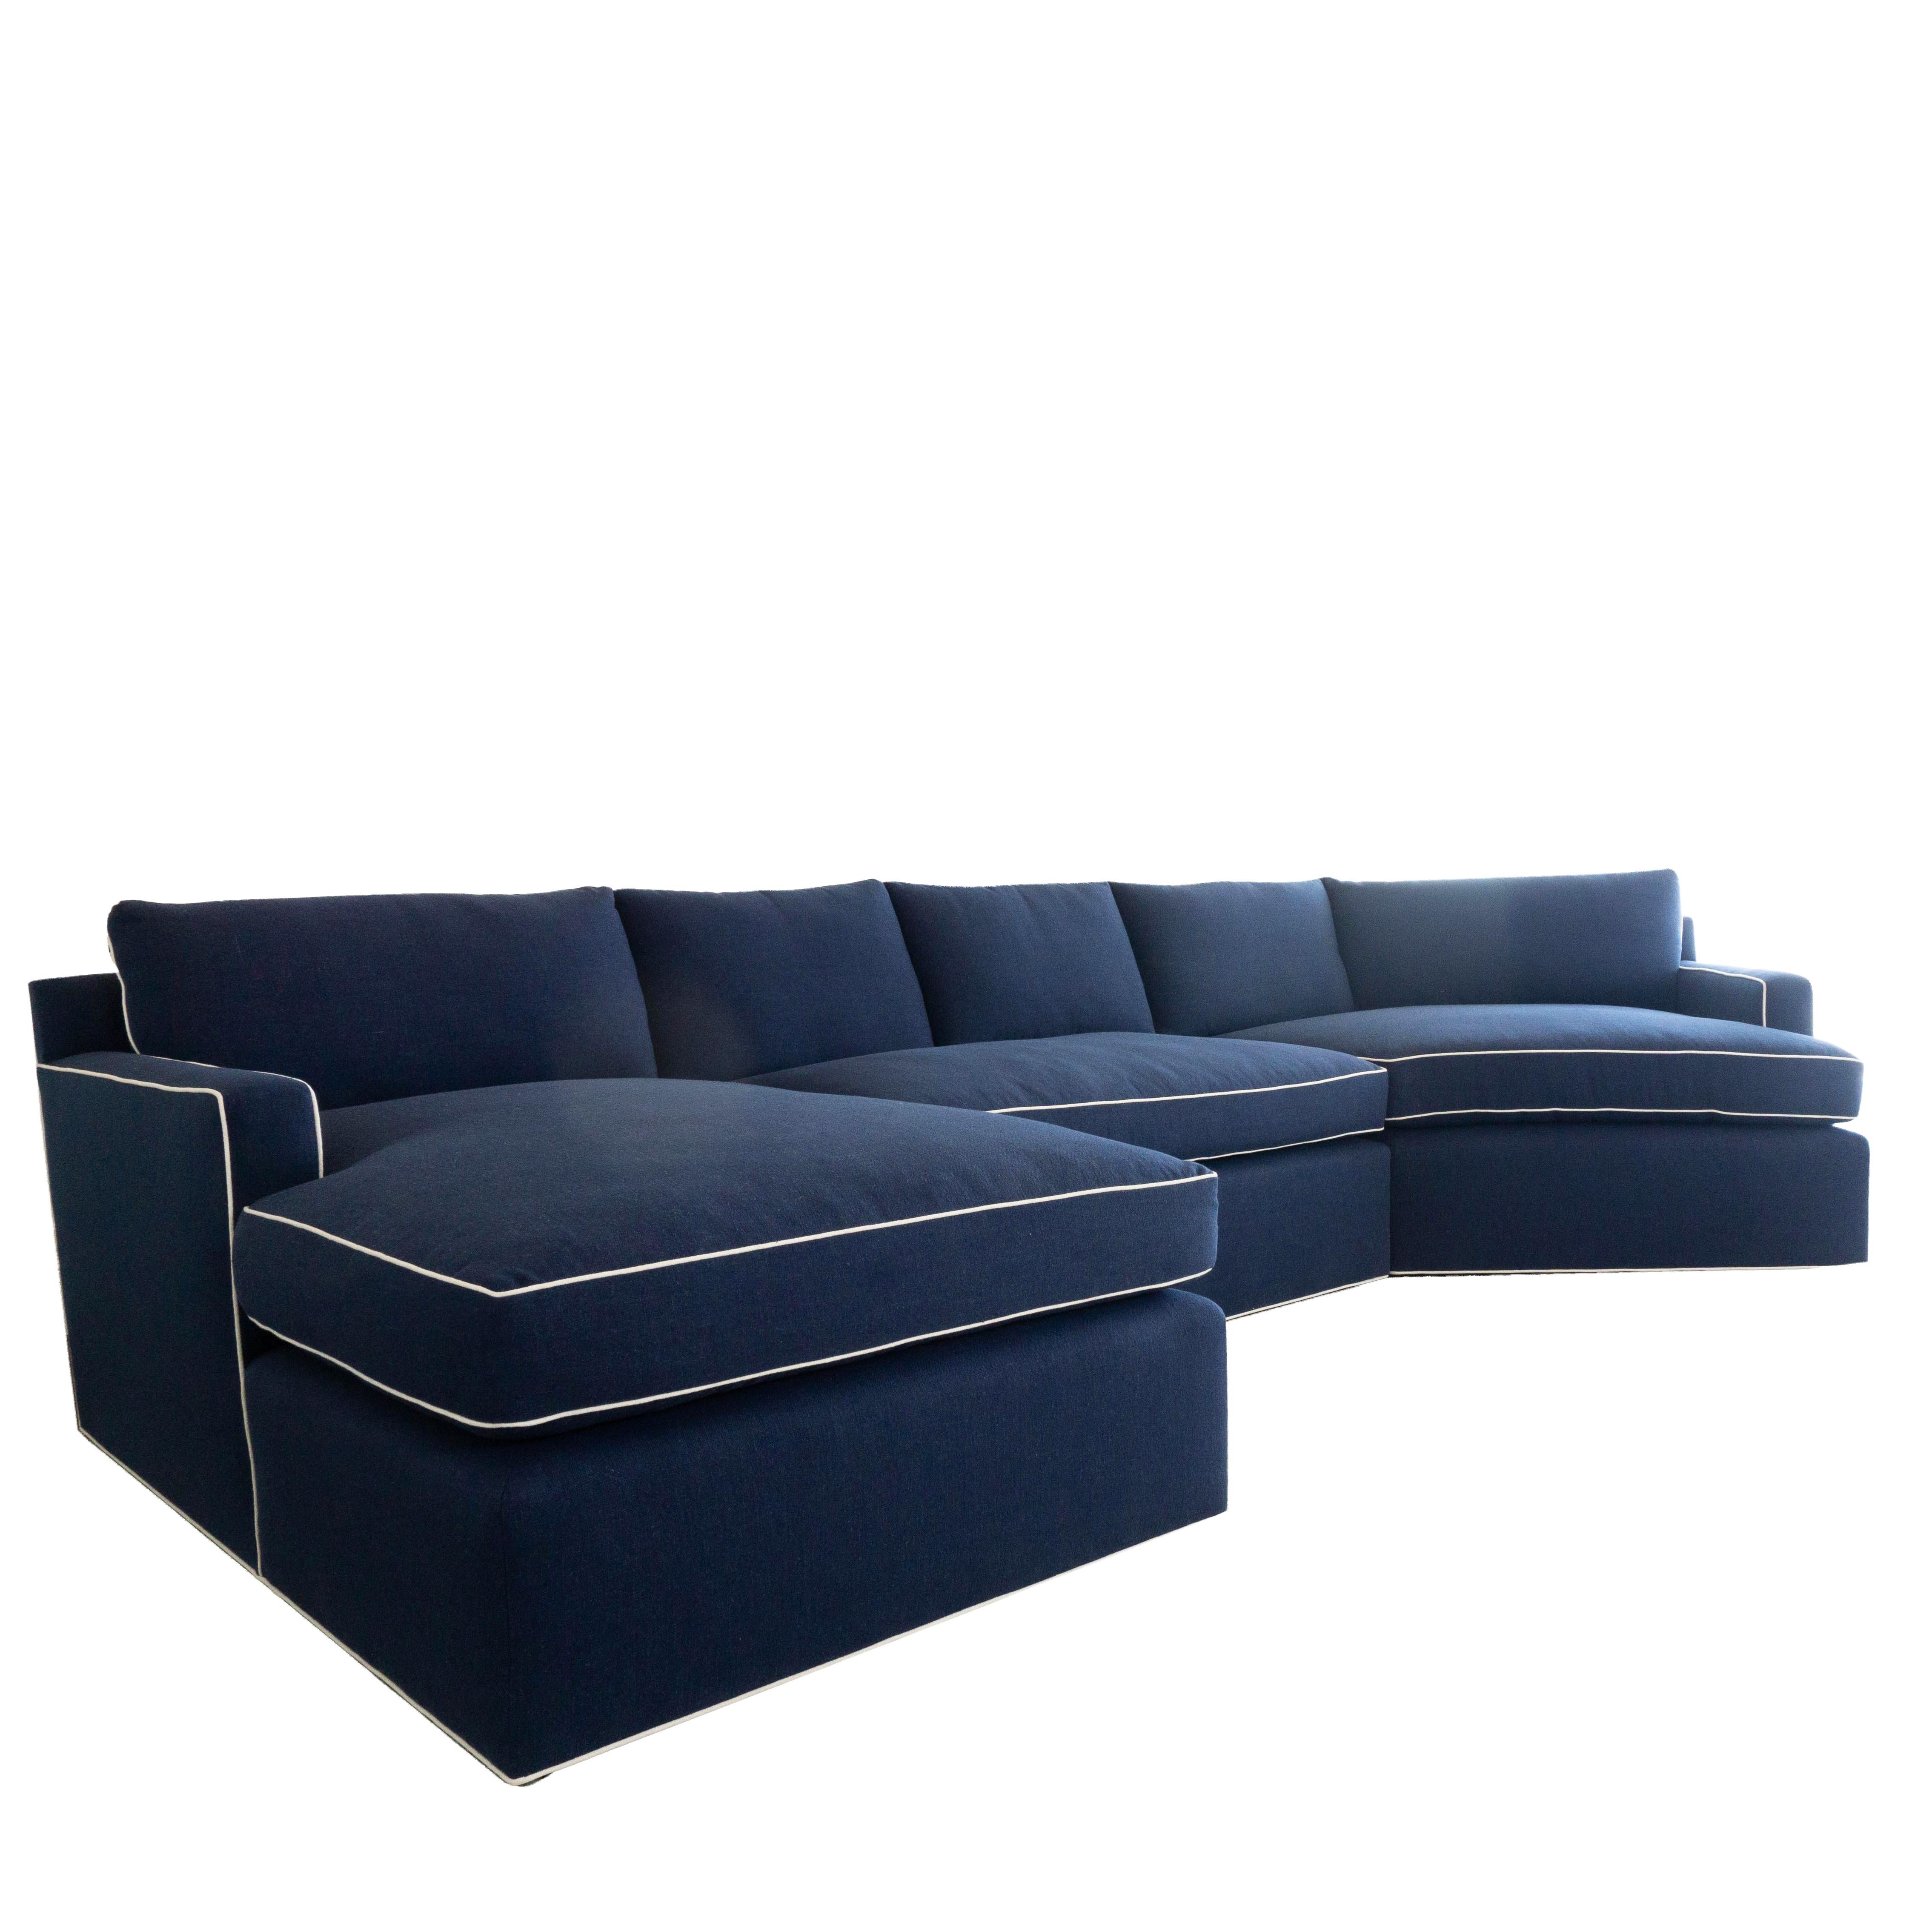 This sectional sofa was a custom order that features three sections: a chaise lounge, loveseat and pod chaise. It also features a low back, with track arms. The back cushions are stuffed with high density foam and feather wrapped in dacron. The sofa